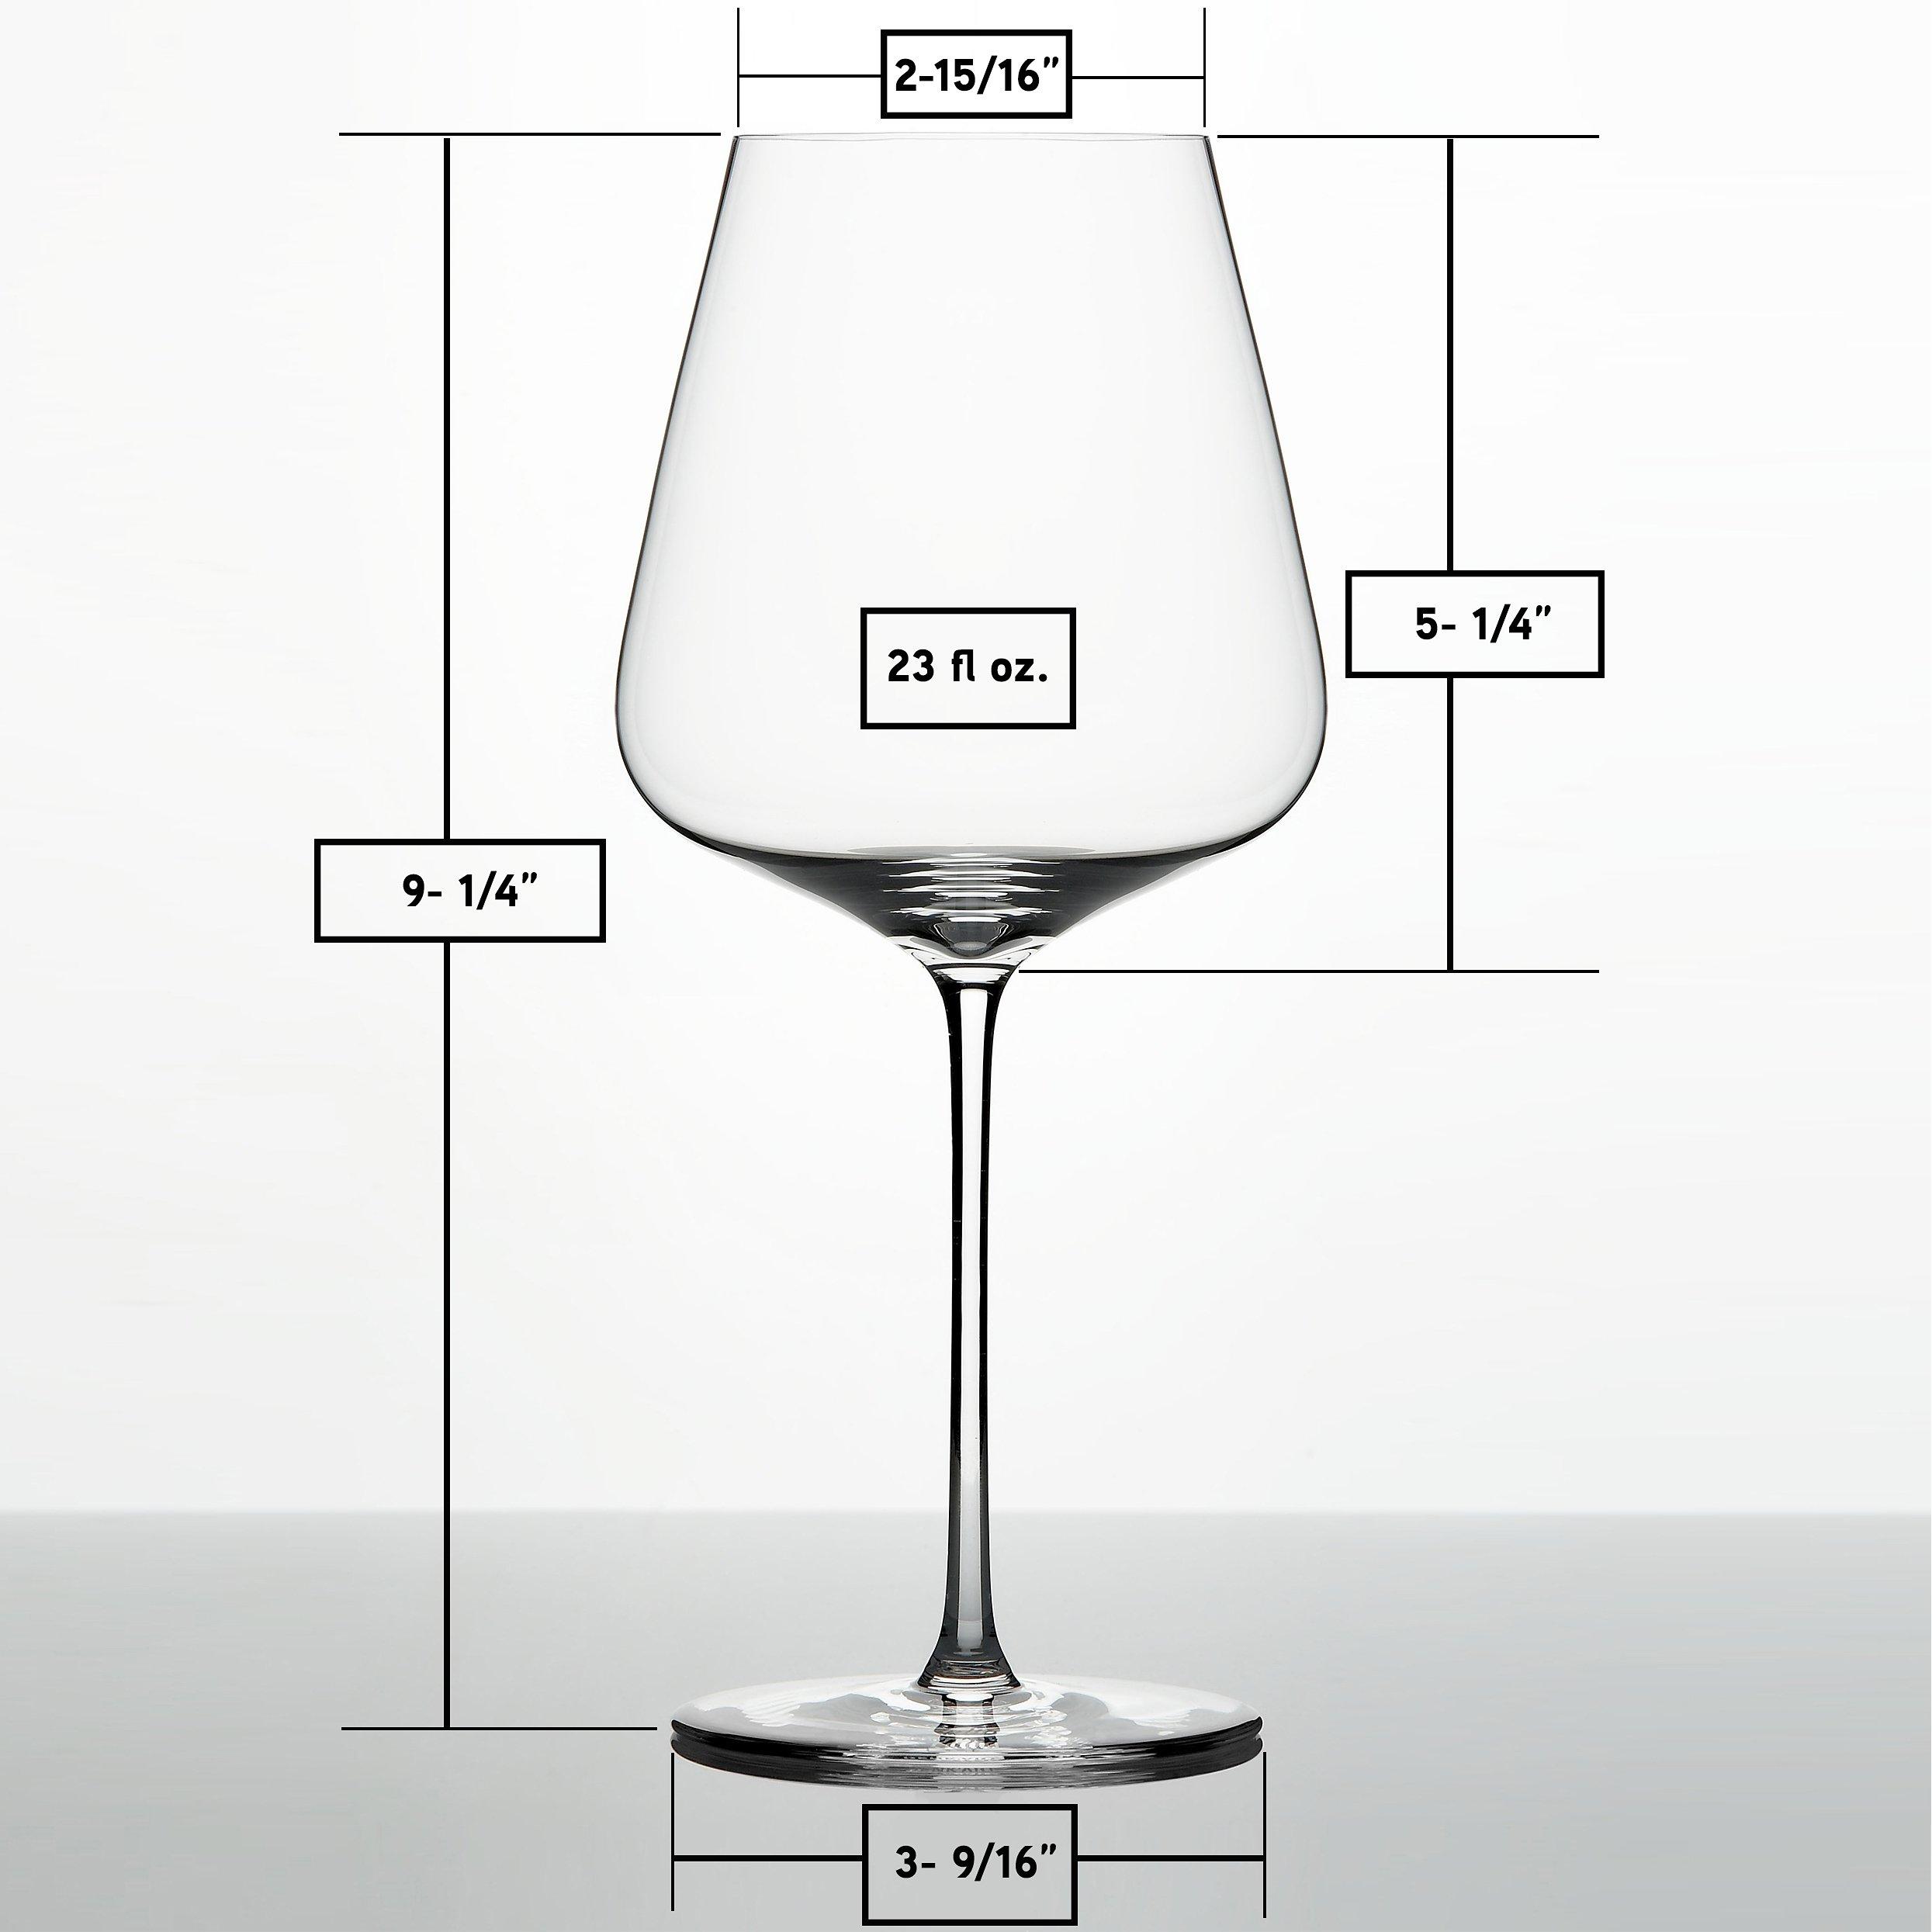 Drinking Glasses Dimensions & Drawings